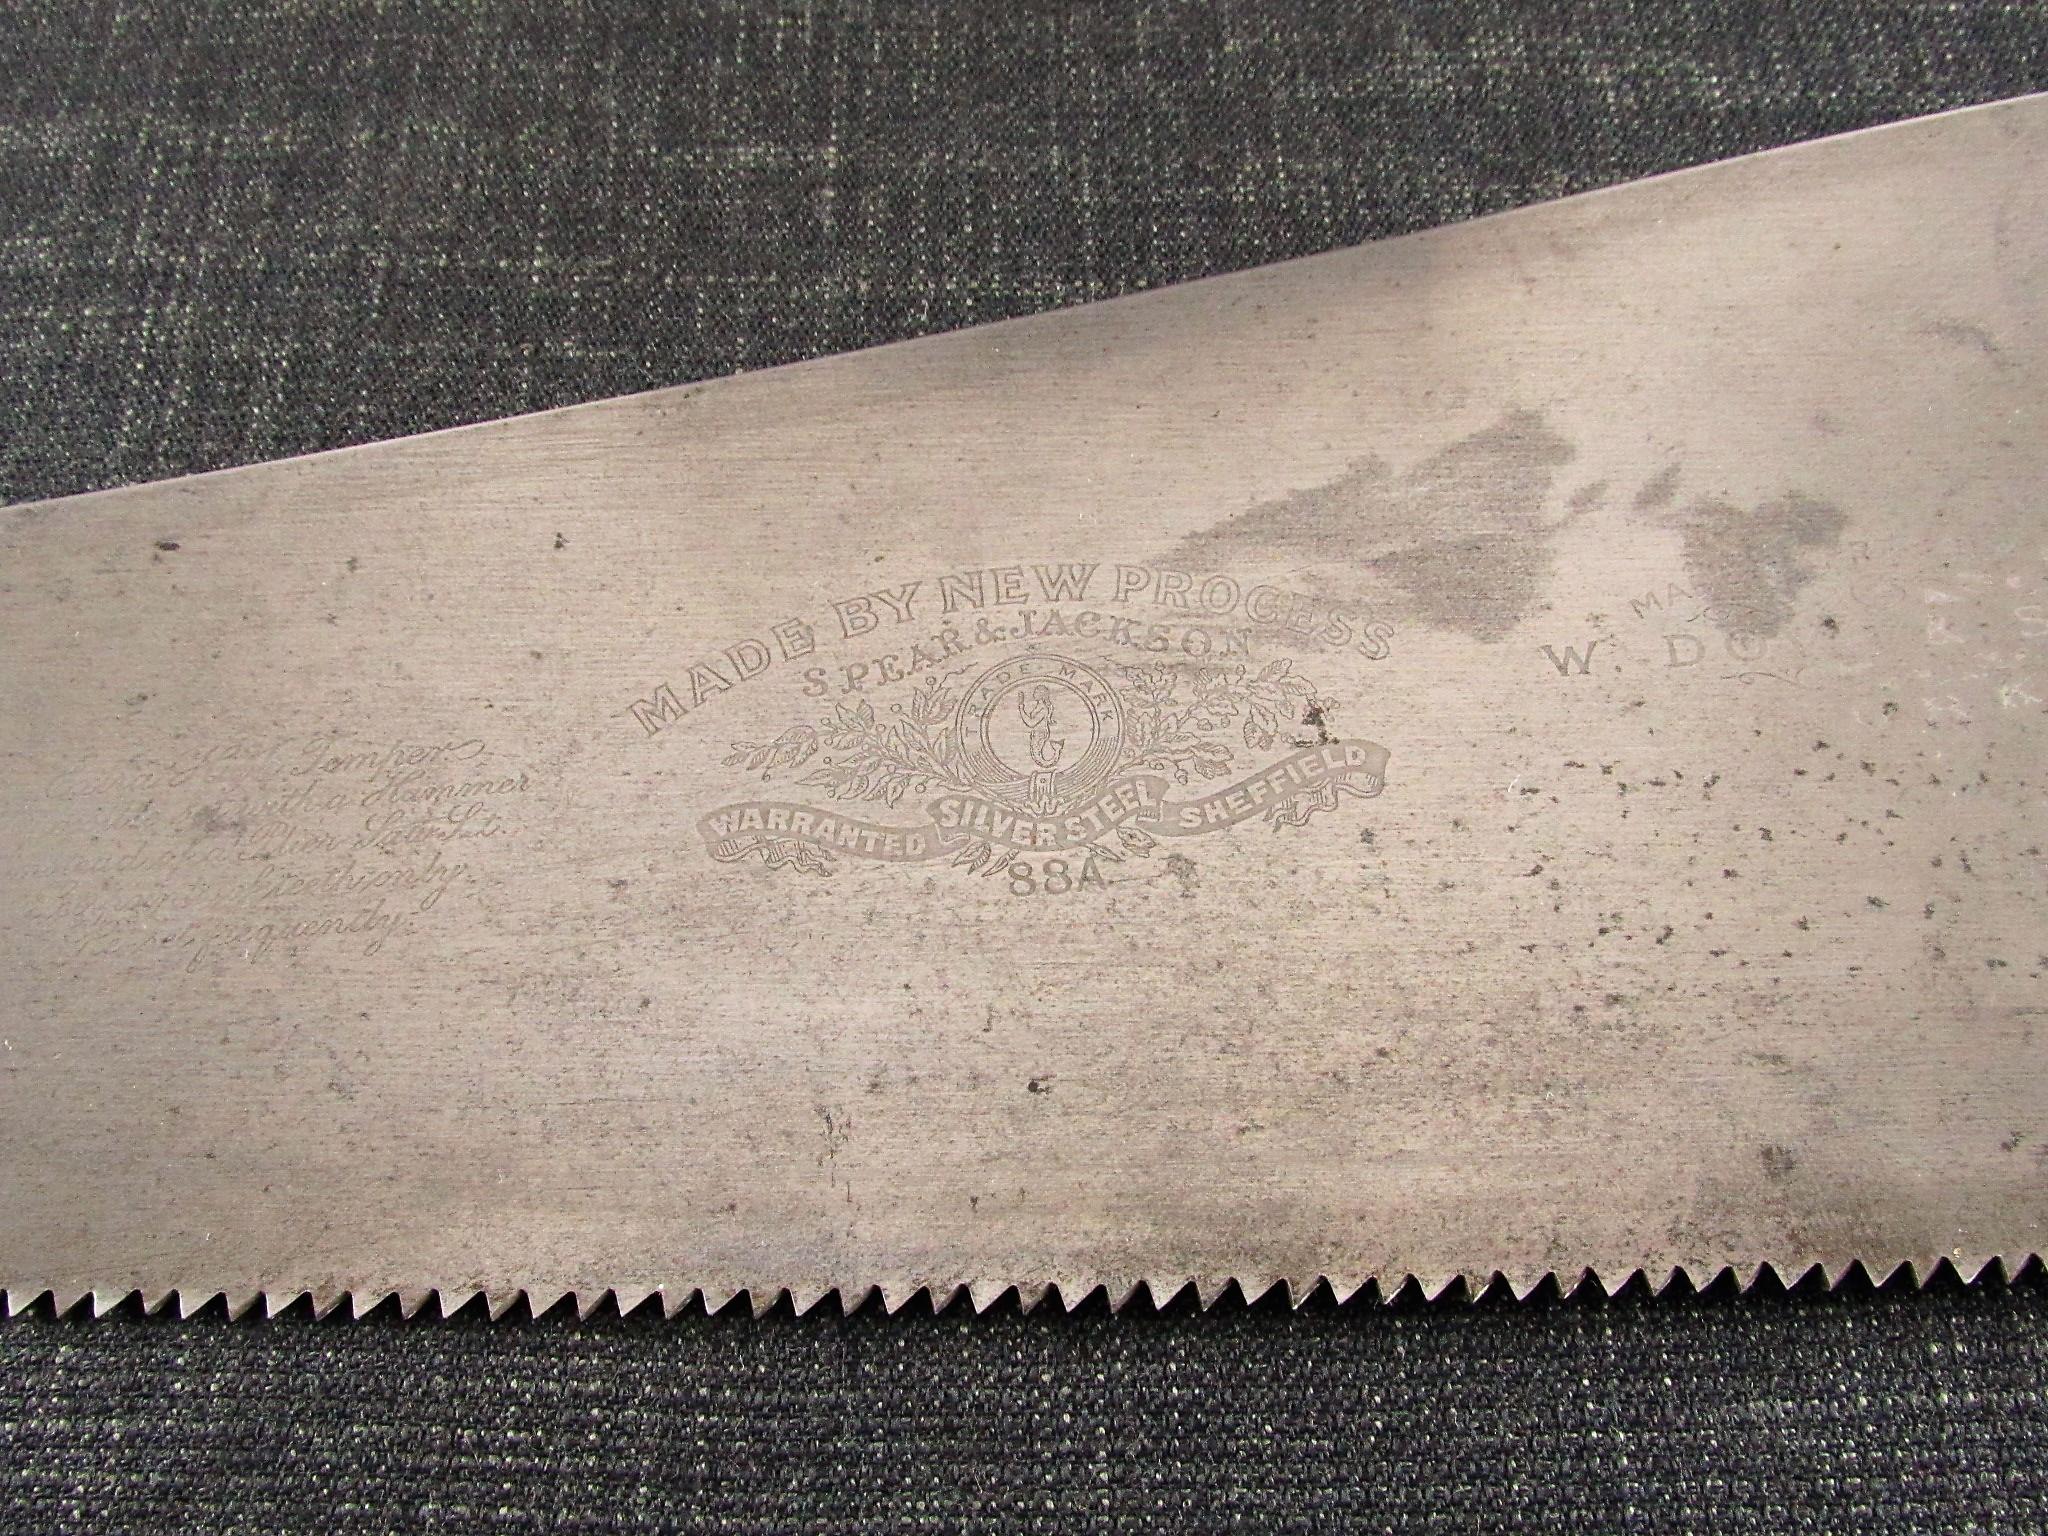 SPEAR & JACKSON 88 A Rip Cut Panel Saw for W DOVE & SONS - 26 inch Silver Steel